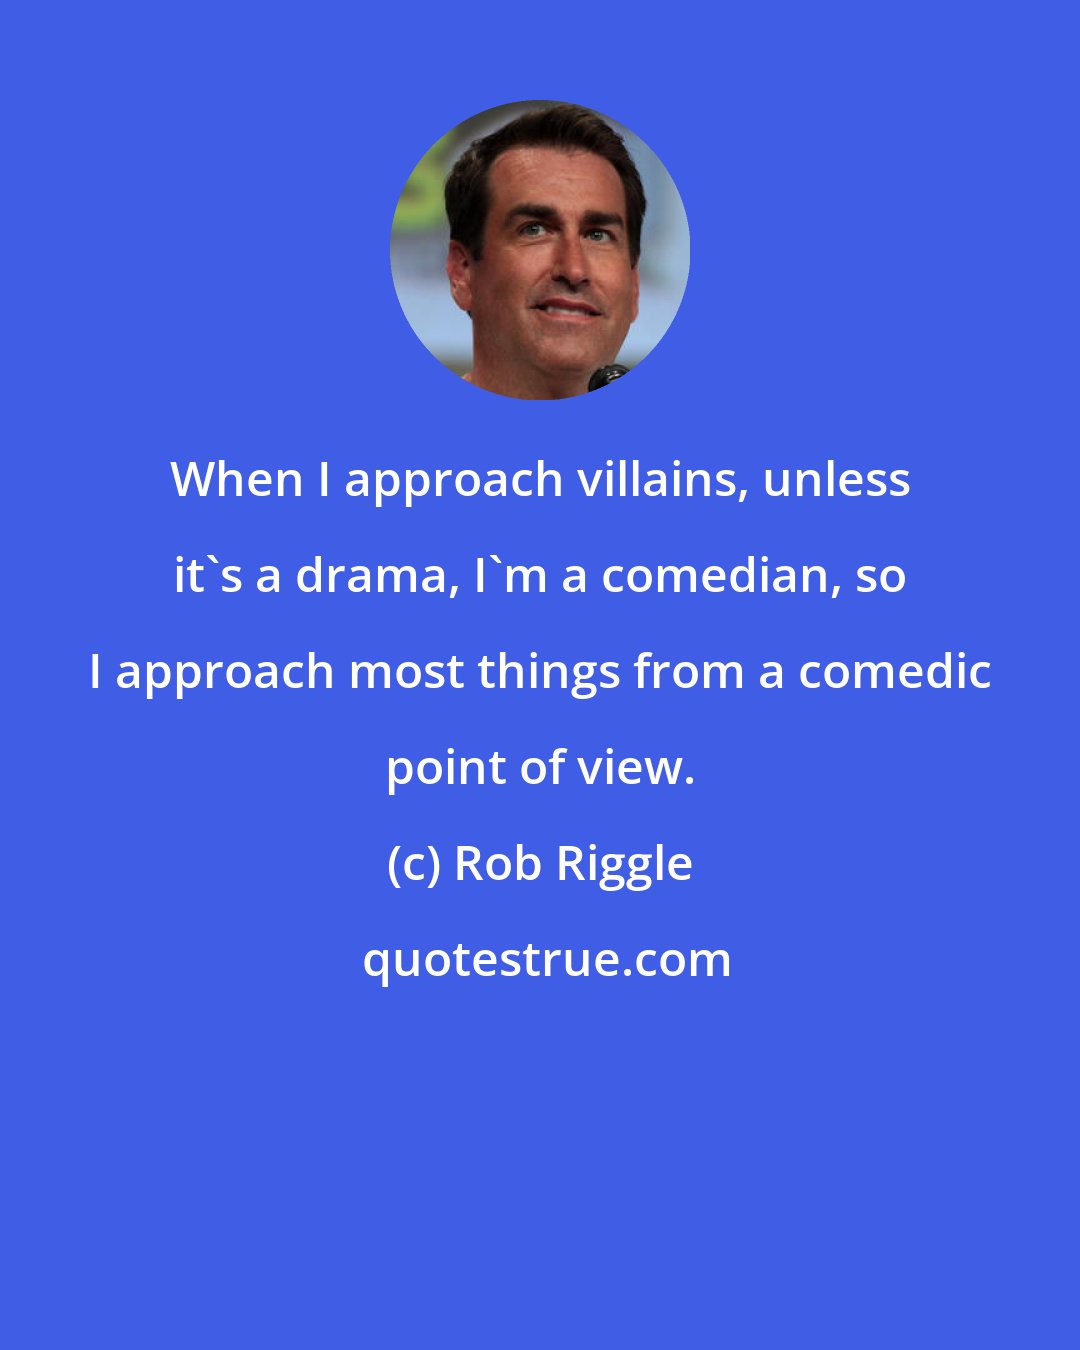 Rob Riggle: When I approach villains, unless it's a drama, I'm a comedian, so I approach most things from a comedic point of view.